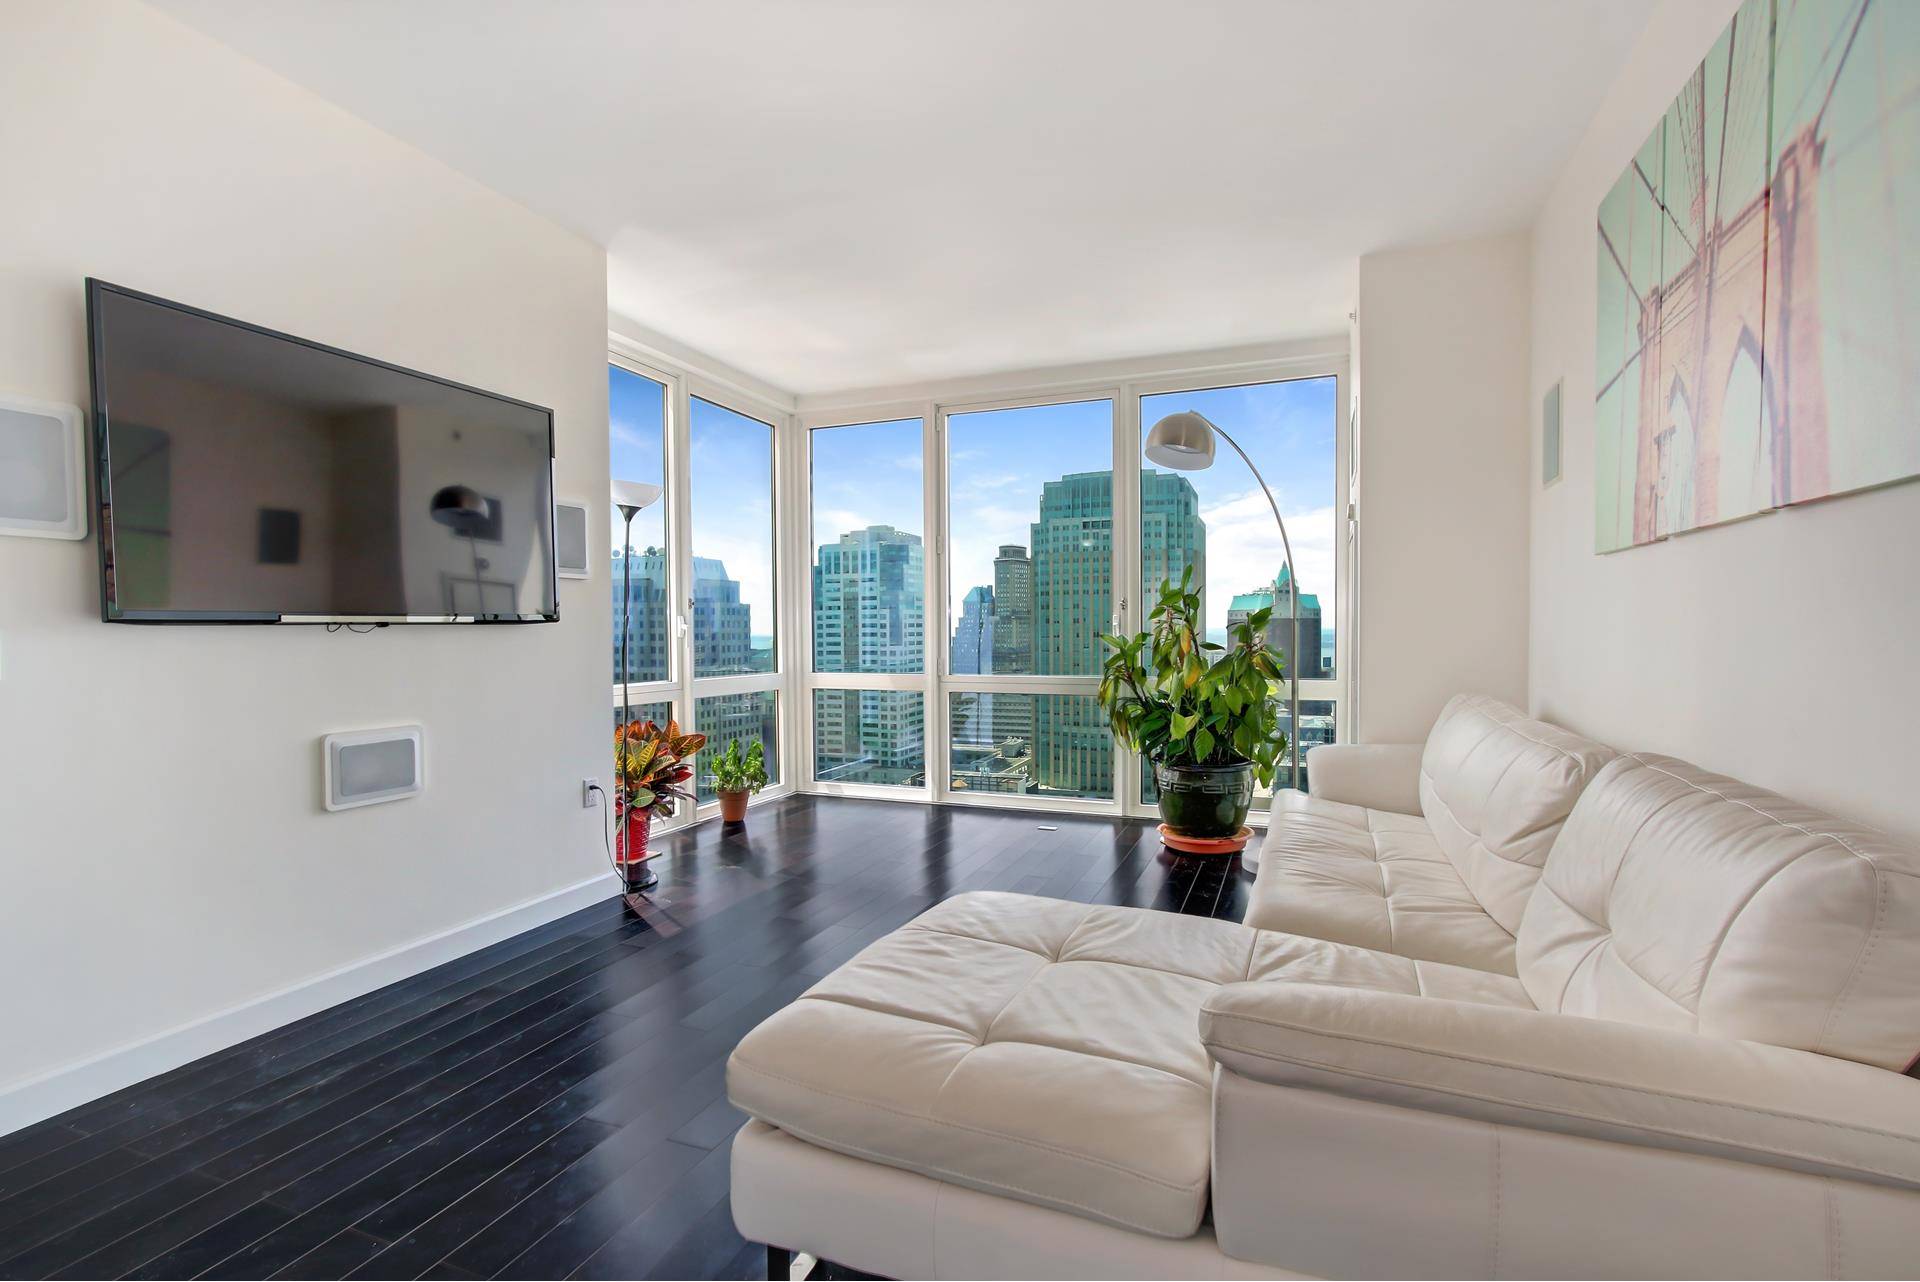 Available Immediately. Prepare to be seduced by breathtaking views of the Manhattan Bridge, full Downtown skyline and beyond.